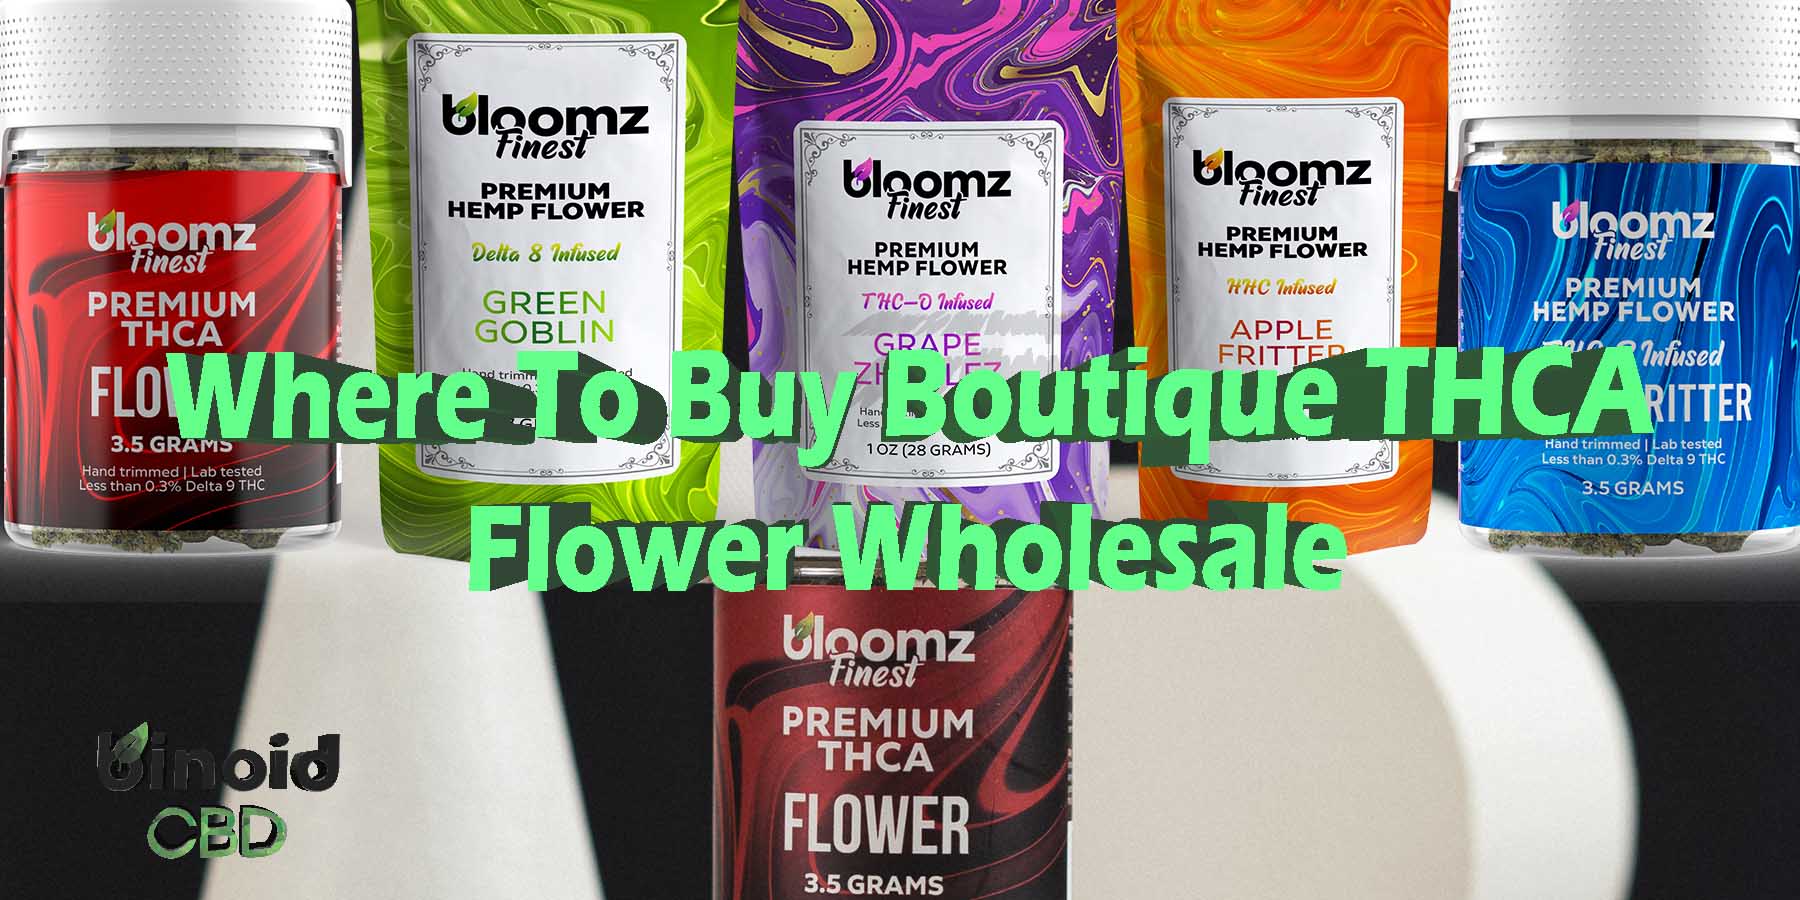 Where To Buy Boutique THCA Flower Wholesale WhereToGet HowToGetNearMe BestPlace LowestPrice Coupon Discount StrongestBrand BestBrand Binoid.